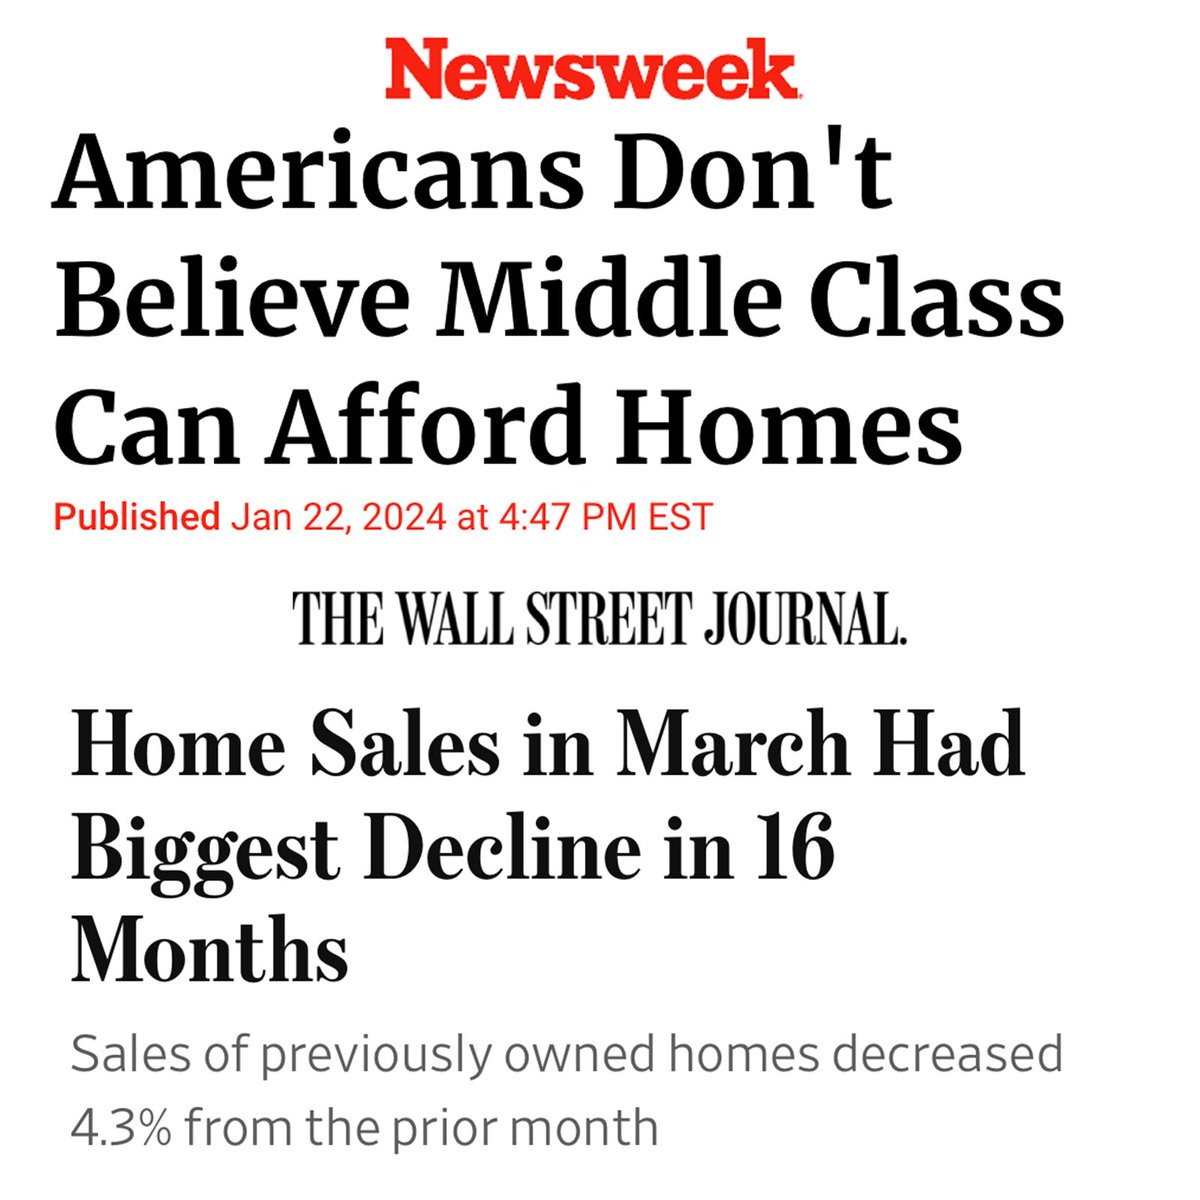 Started / Going If only we could value housing the way we value the real estate and banking profits we never see trickle down.